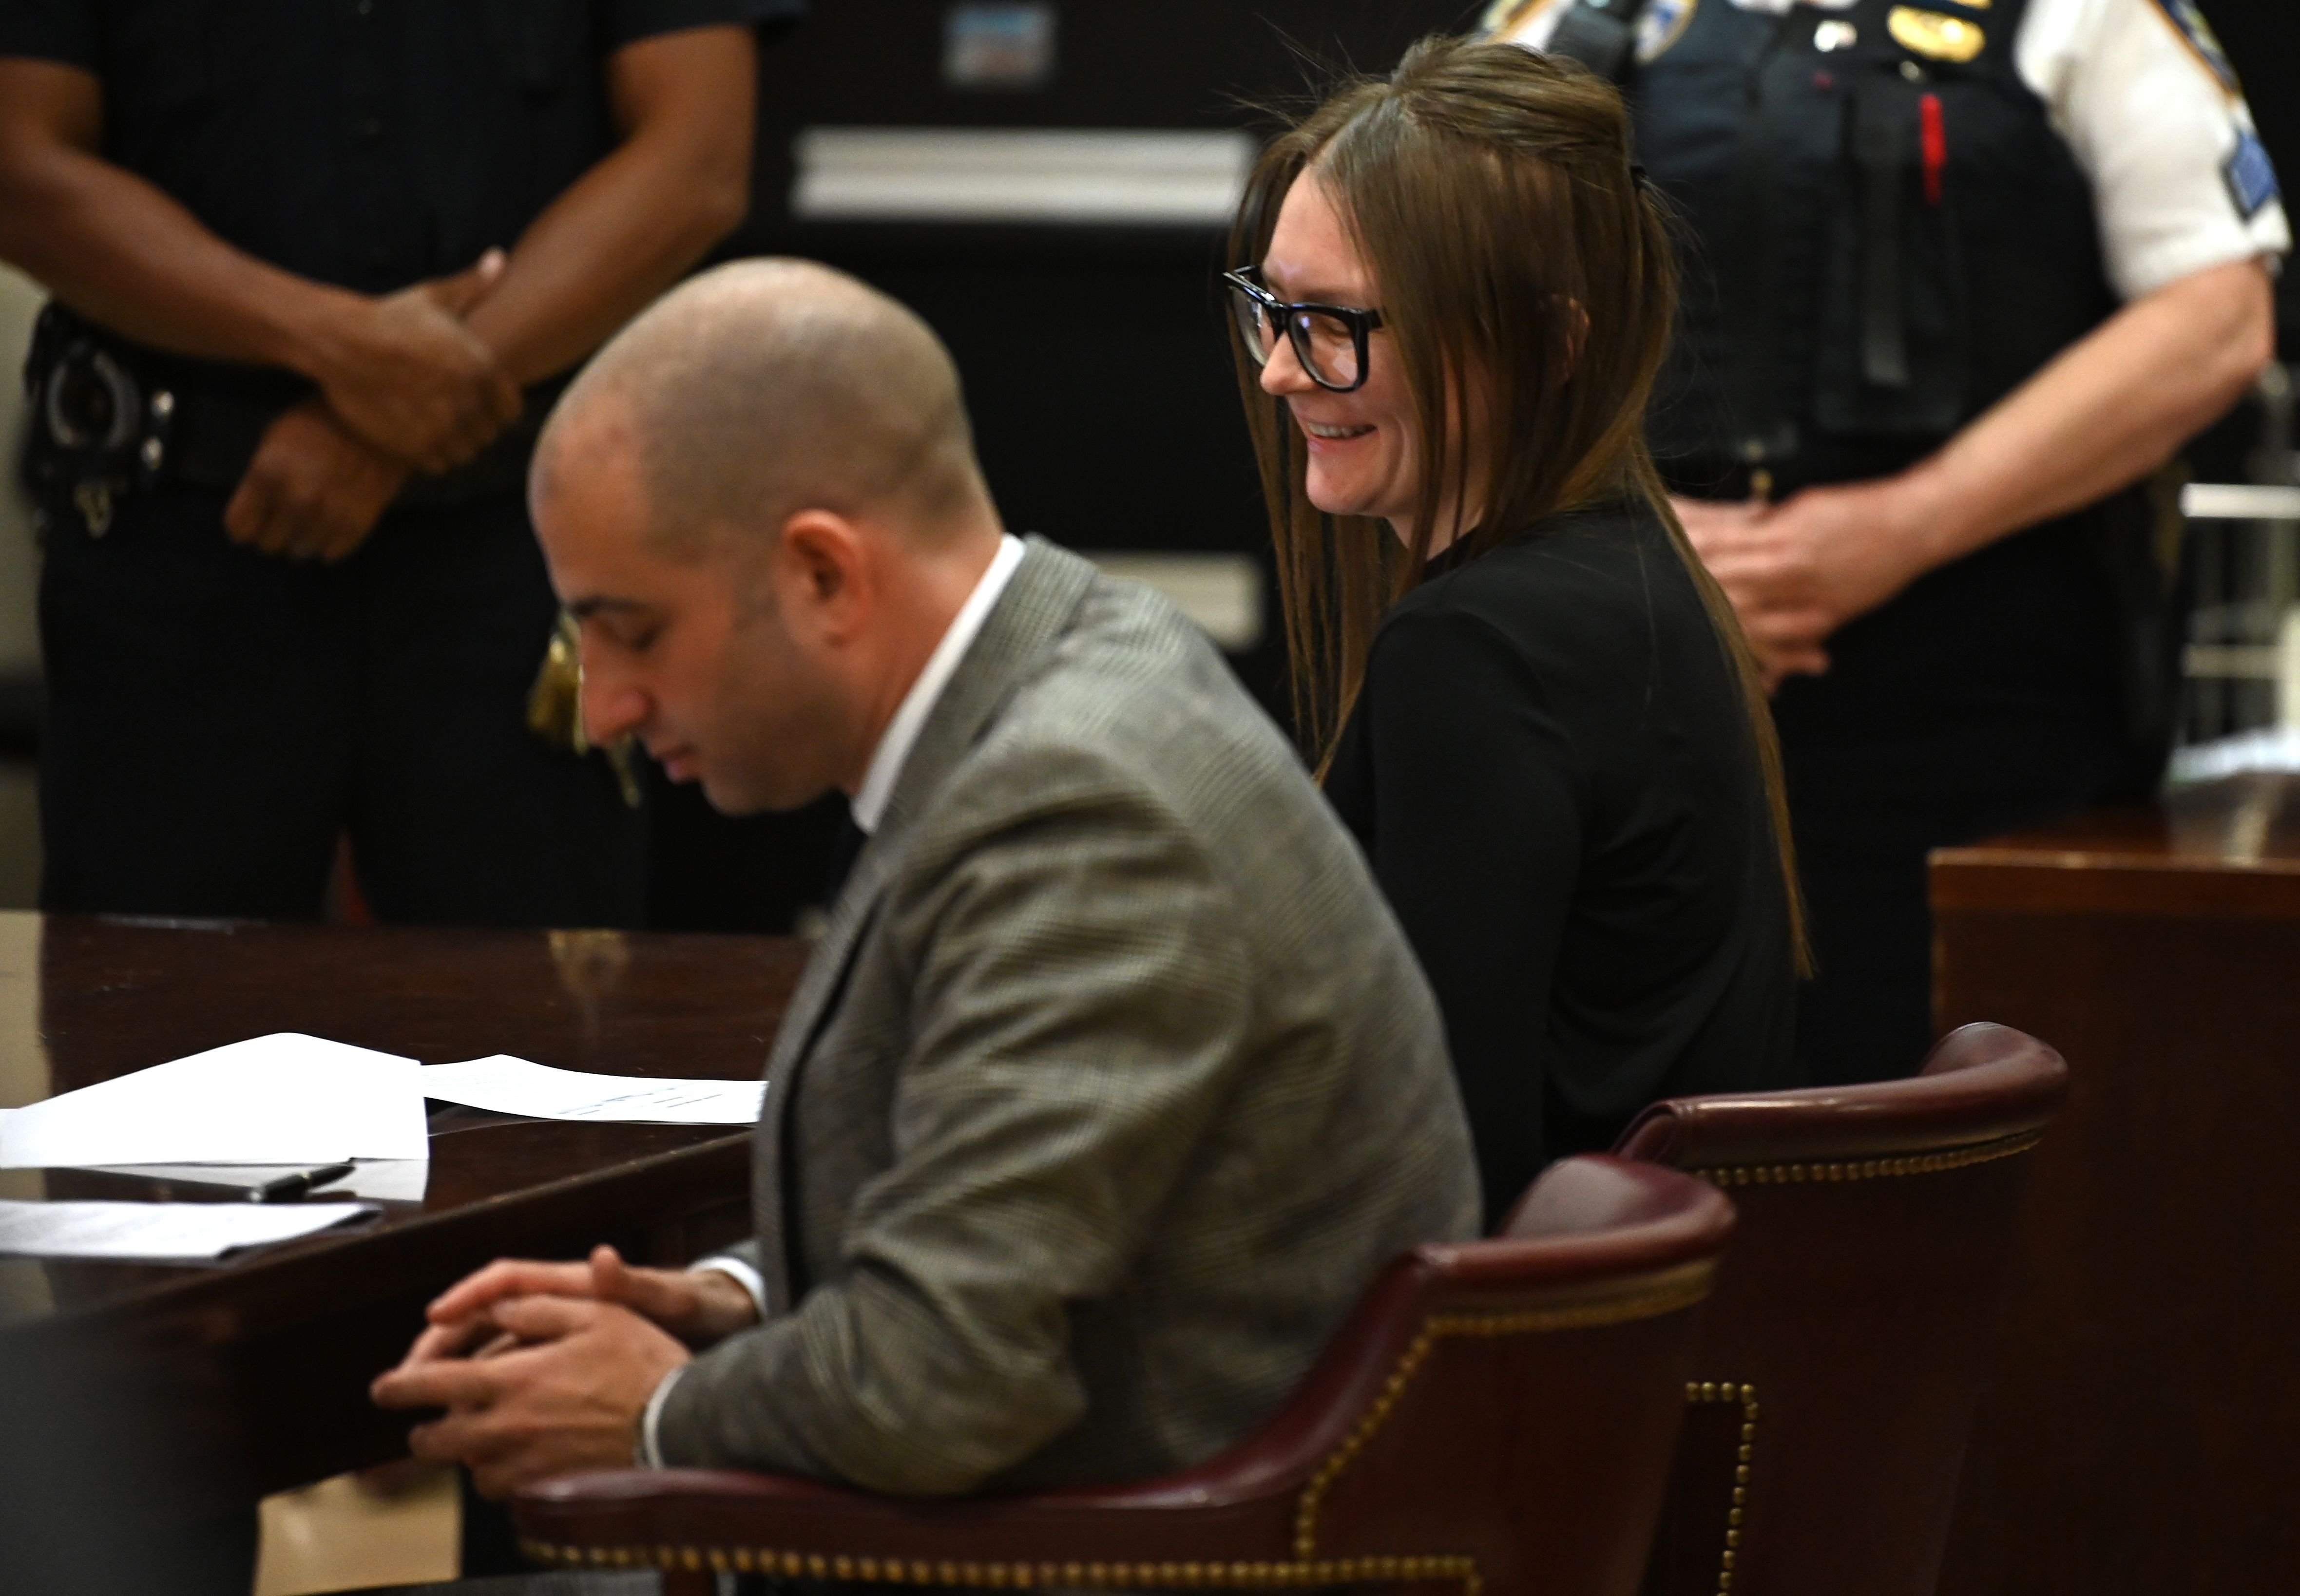 Anna Sorokin is pictured smiling next to her attorney Todd Spodek during her sentencing at Manhattan Supreme Court | Source: Getty Images